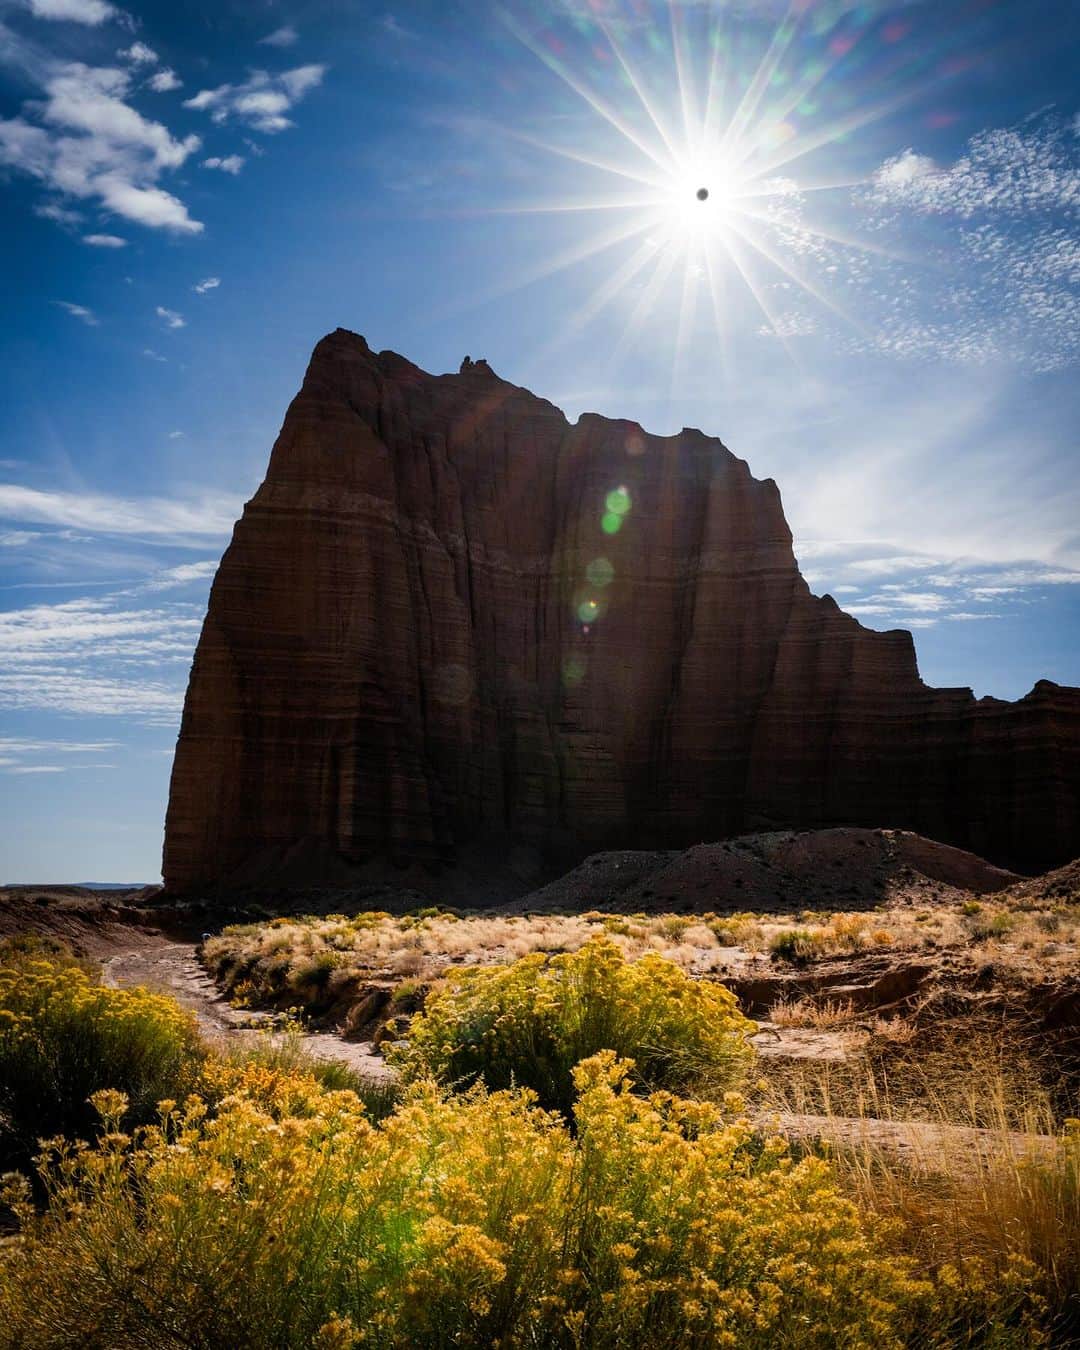 Travis Burkeのインスタグラム：「This morning's ‘Ring Of Fire’ Solar Eclipse above the Temple of the Sun in Utah.  I blended multiple exposures to show both the landscape and the moon passing entirely in front of the sun, as the combination of both made the experience more beautiful for me.   Capturing different celestial events is always fun and challenging, and I learn a lot each time.   I fell in love with photography because it got me into nature more frequently and made me appreciate the beauty around me. The same is true today and is ultimately why I’ve just committed to massive changes in my life that I am excited to share soon.  I hope you got to witness this eclipse or get the opportunity sometime in the future!  #ringoffireeclipse #solareclipse」